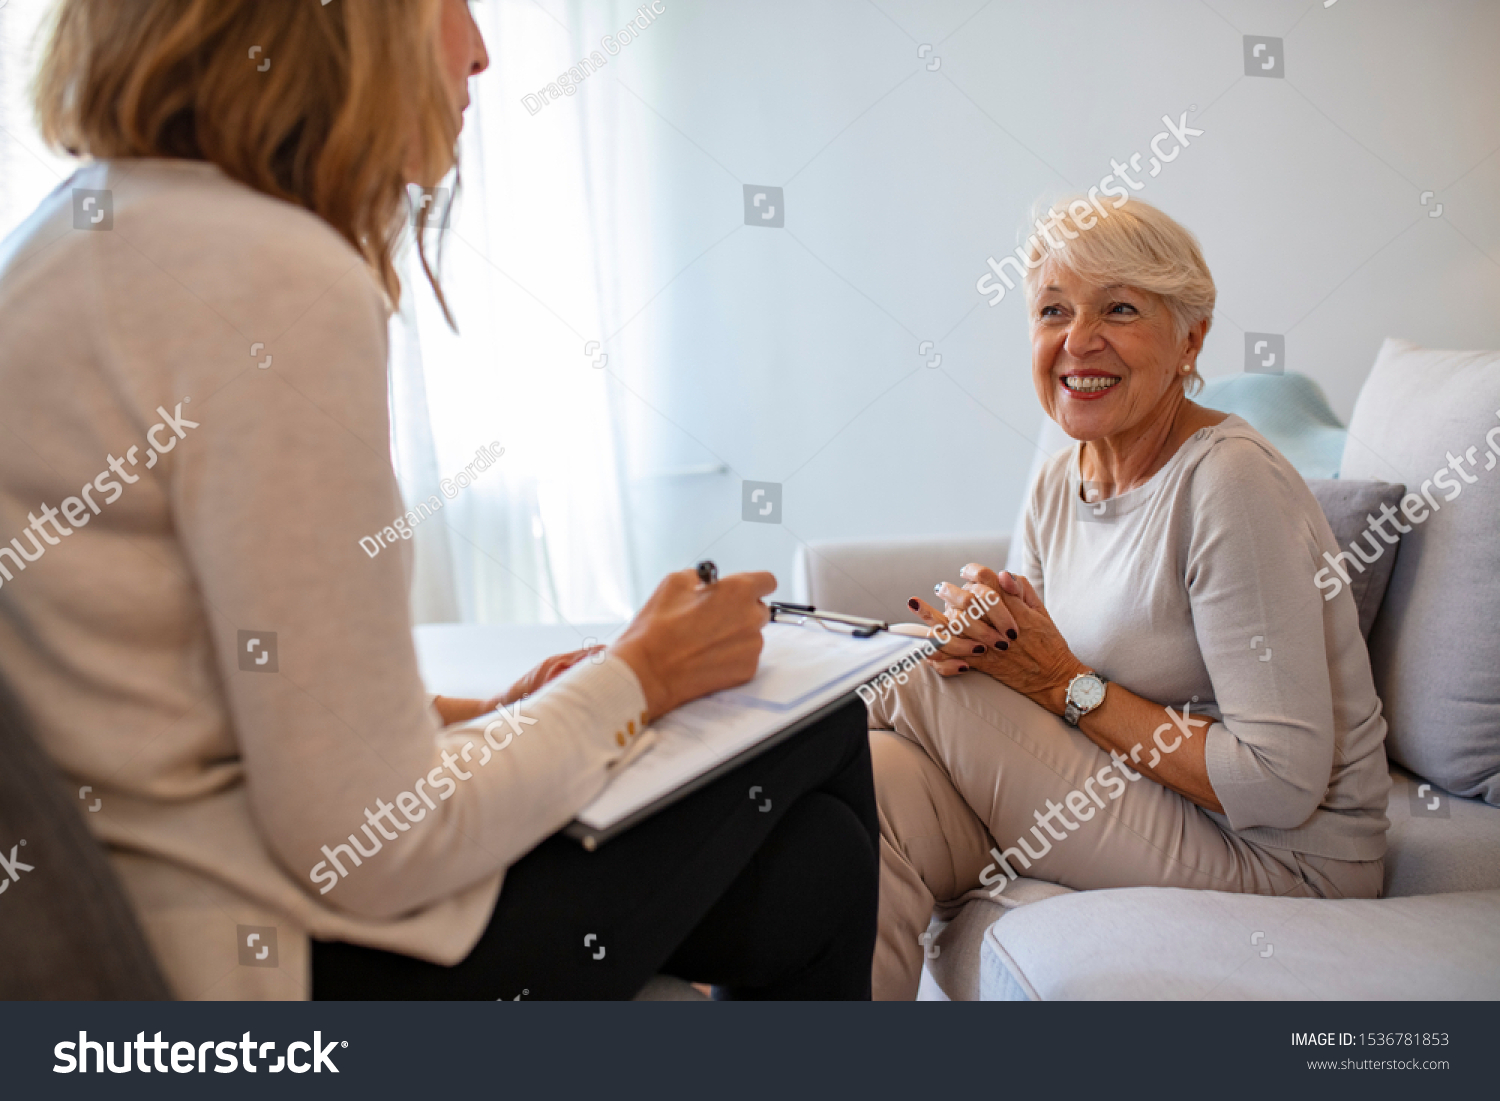 Geriatric psychology, mental therapy and old age concept - Senior woman patient and psychologist at psychotherapy session. Senior woman talking with female psychologist #1536781853